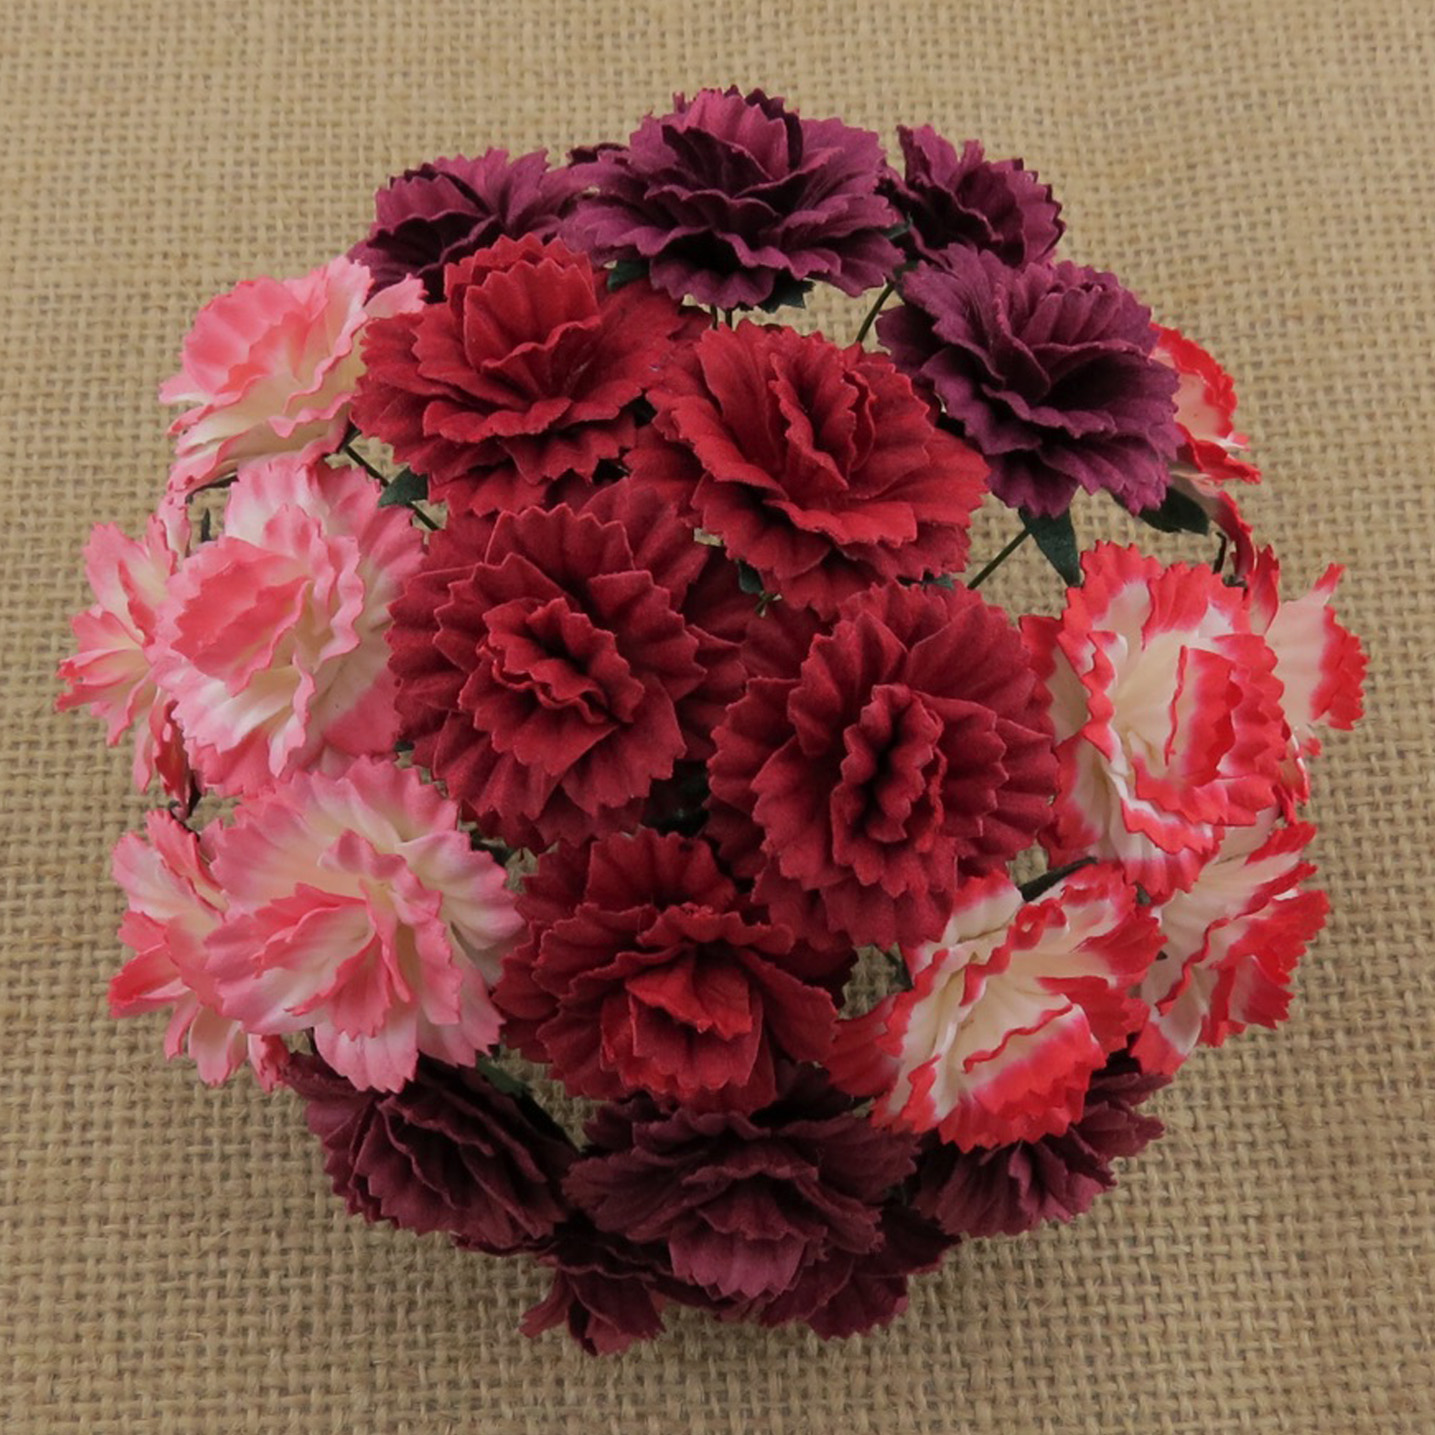 50 MIXED RED MULBERRY PAPER CARNATION FLOWERS